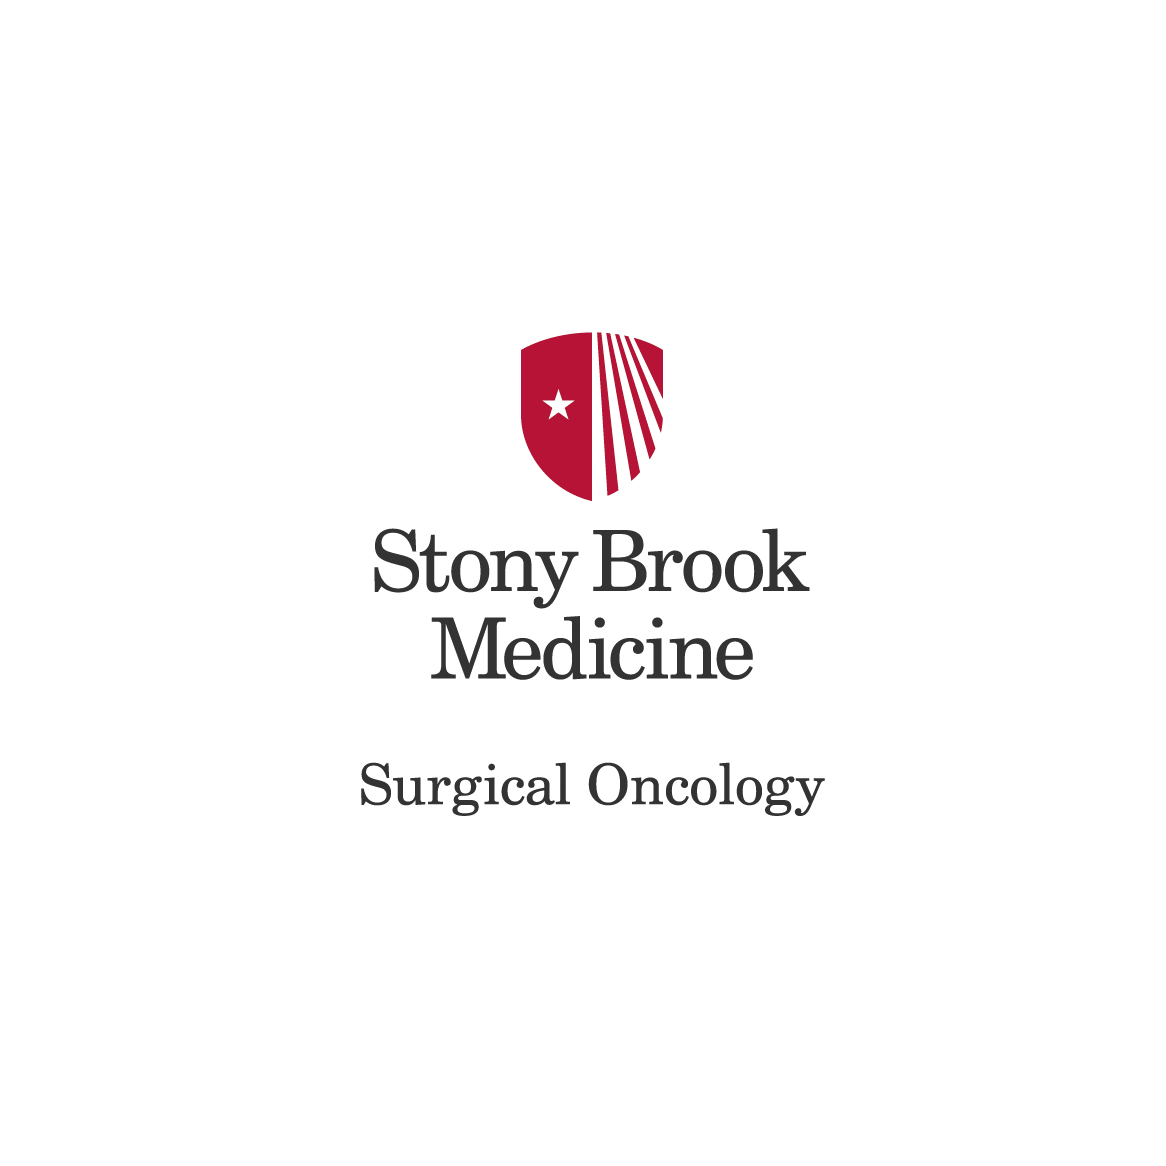 Stony Brook Division of Surgical Oncology